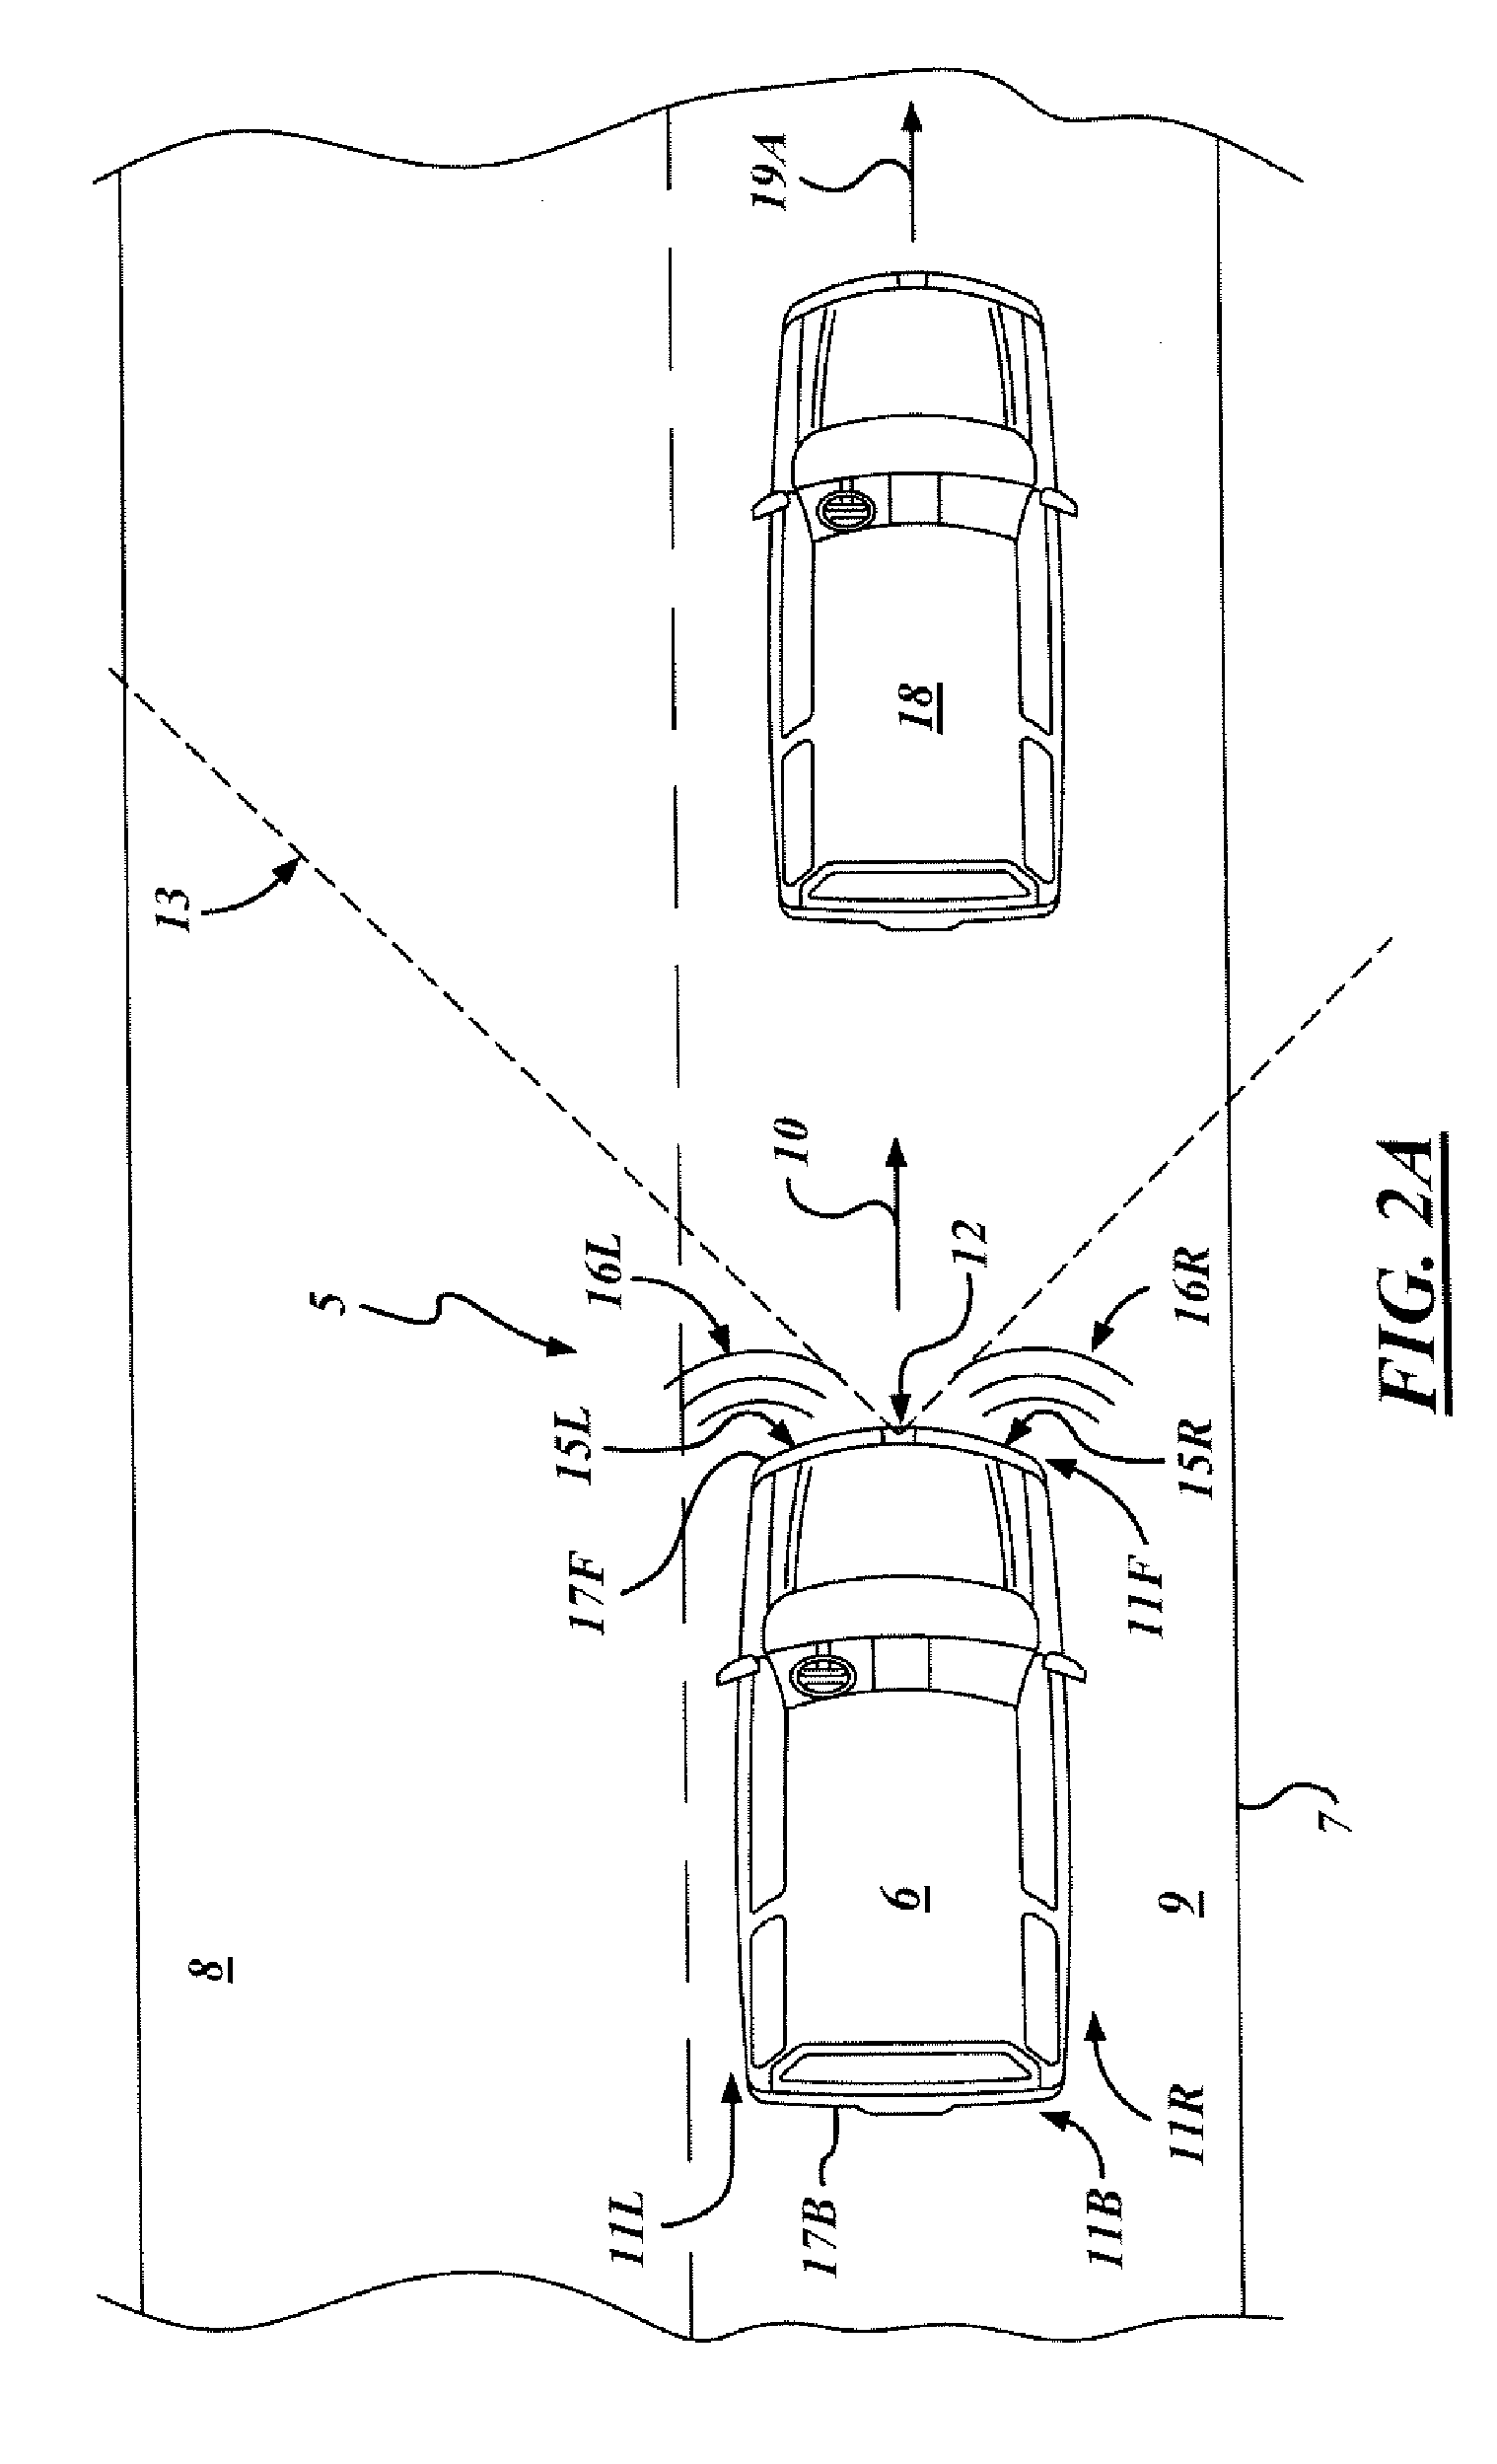 System and method for preemptively sensing an object and selectively operating both a collision countermeasure system and a parking assistance system aboard an automotive vehicle